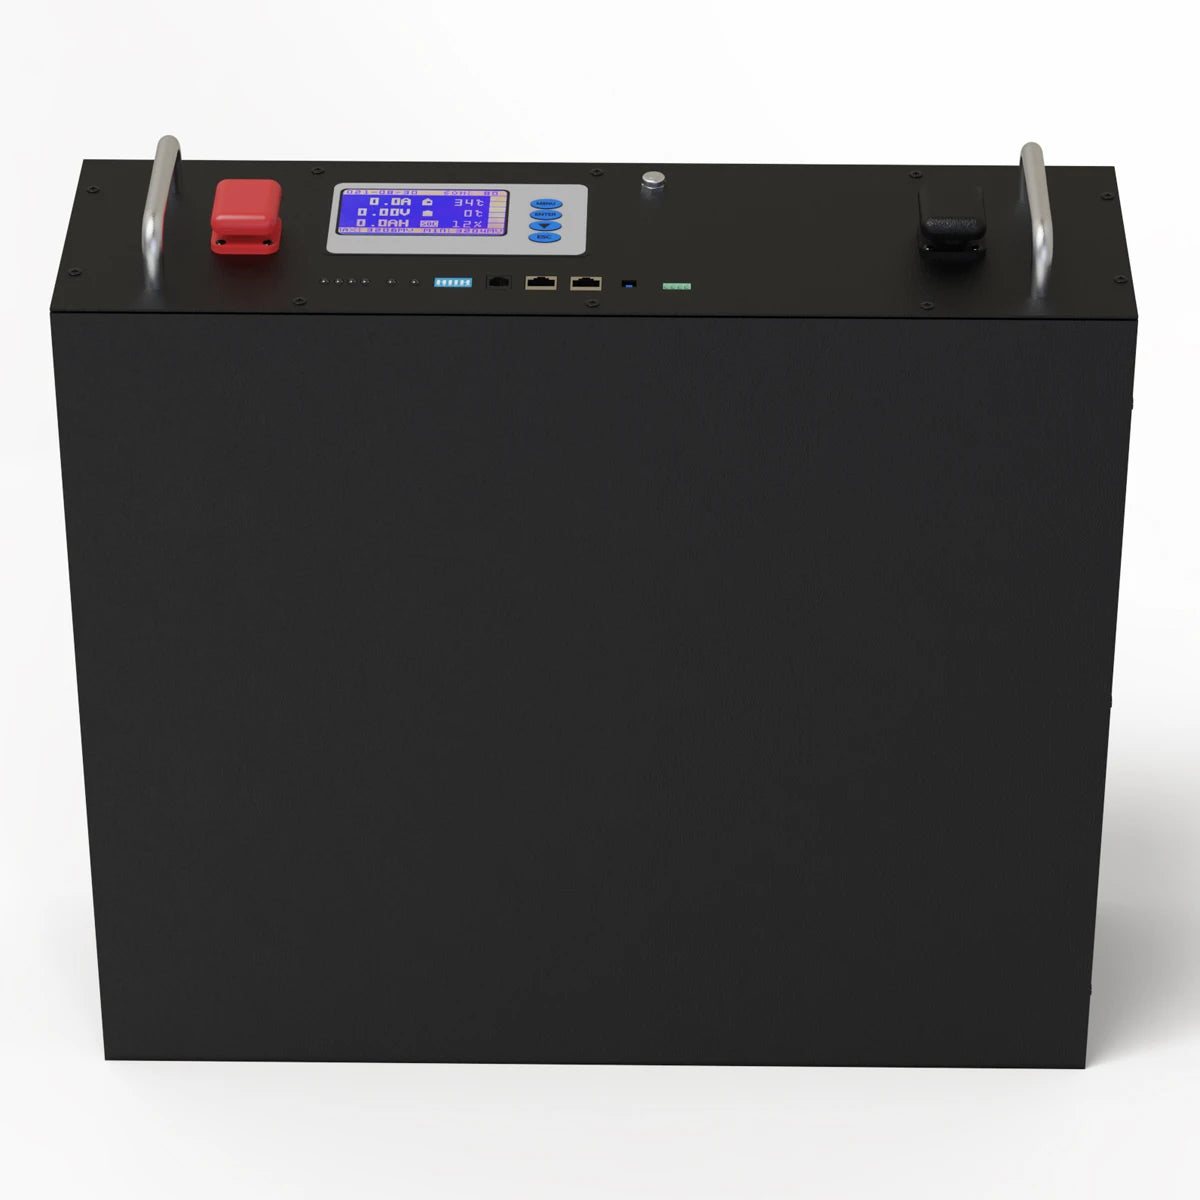 LiFePO4 24V 5KW Battery, CERRNSS battery features: continuous current, pulse current, discharge cut-off voltage, water resistance, stainless steel box.